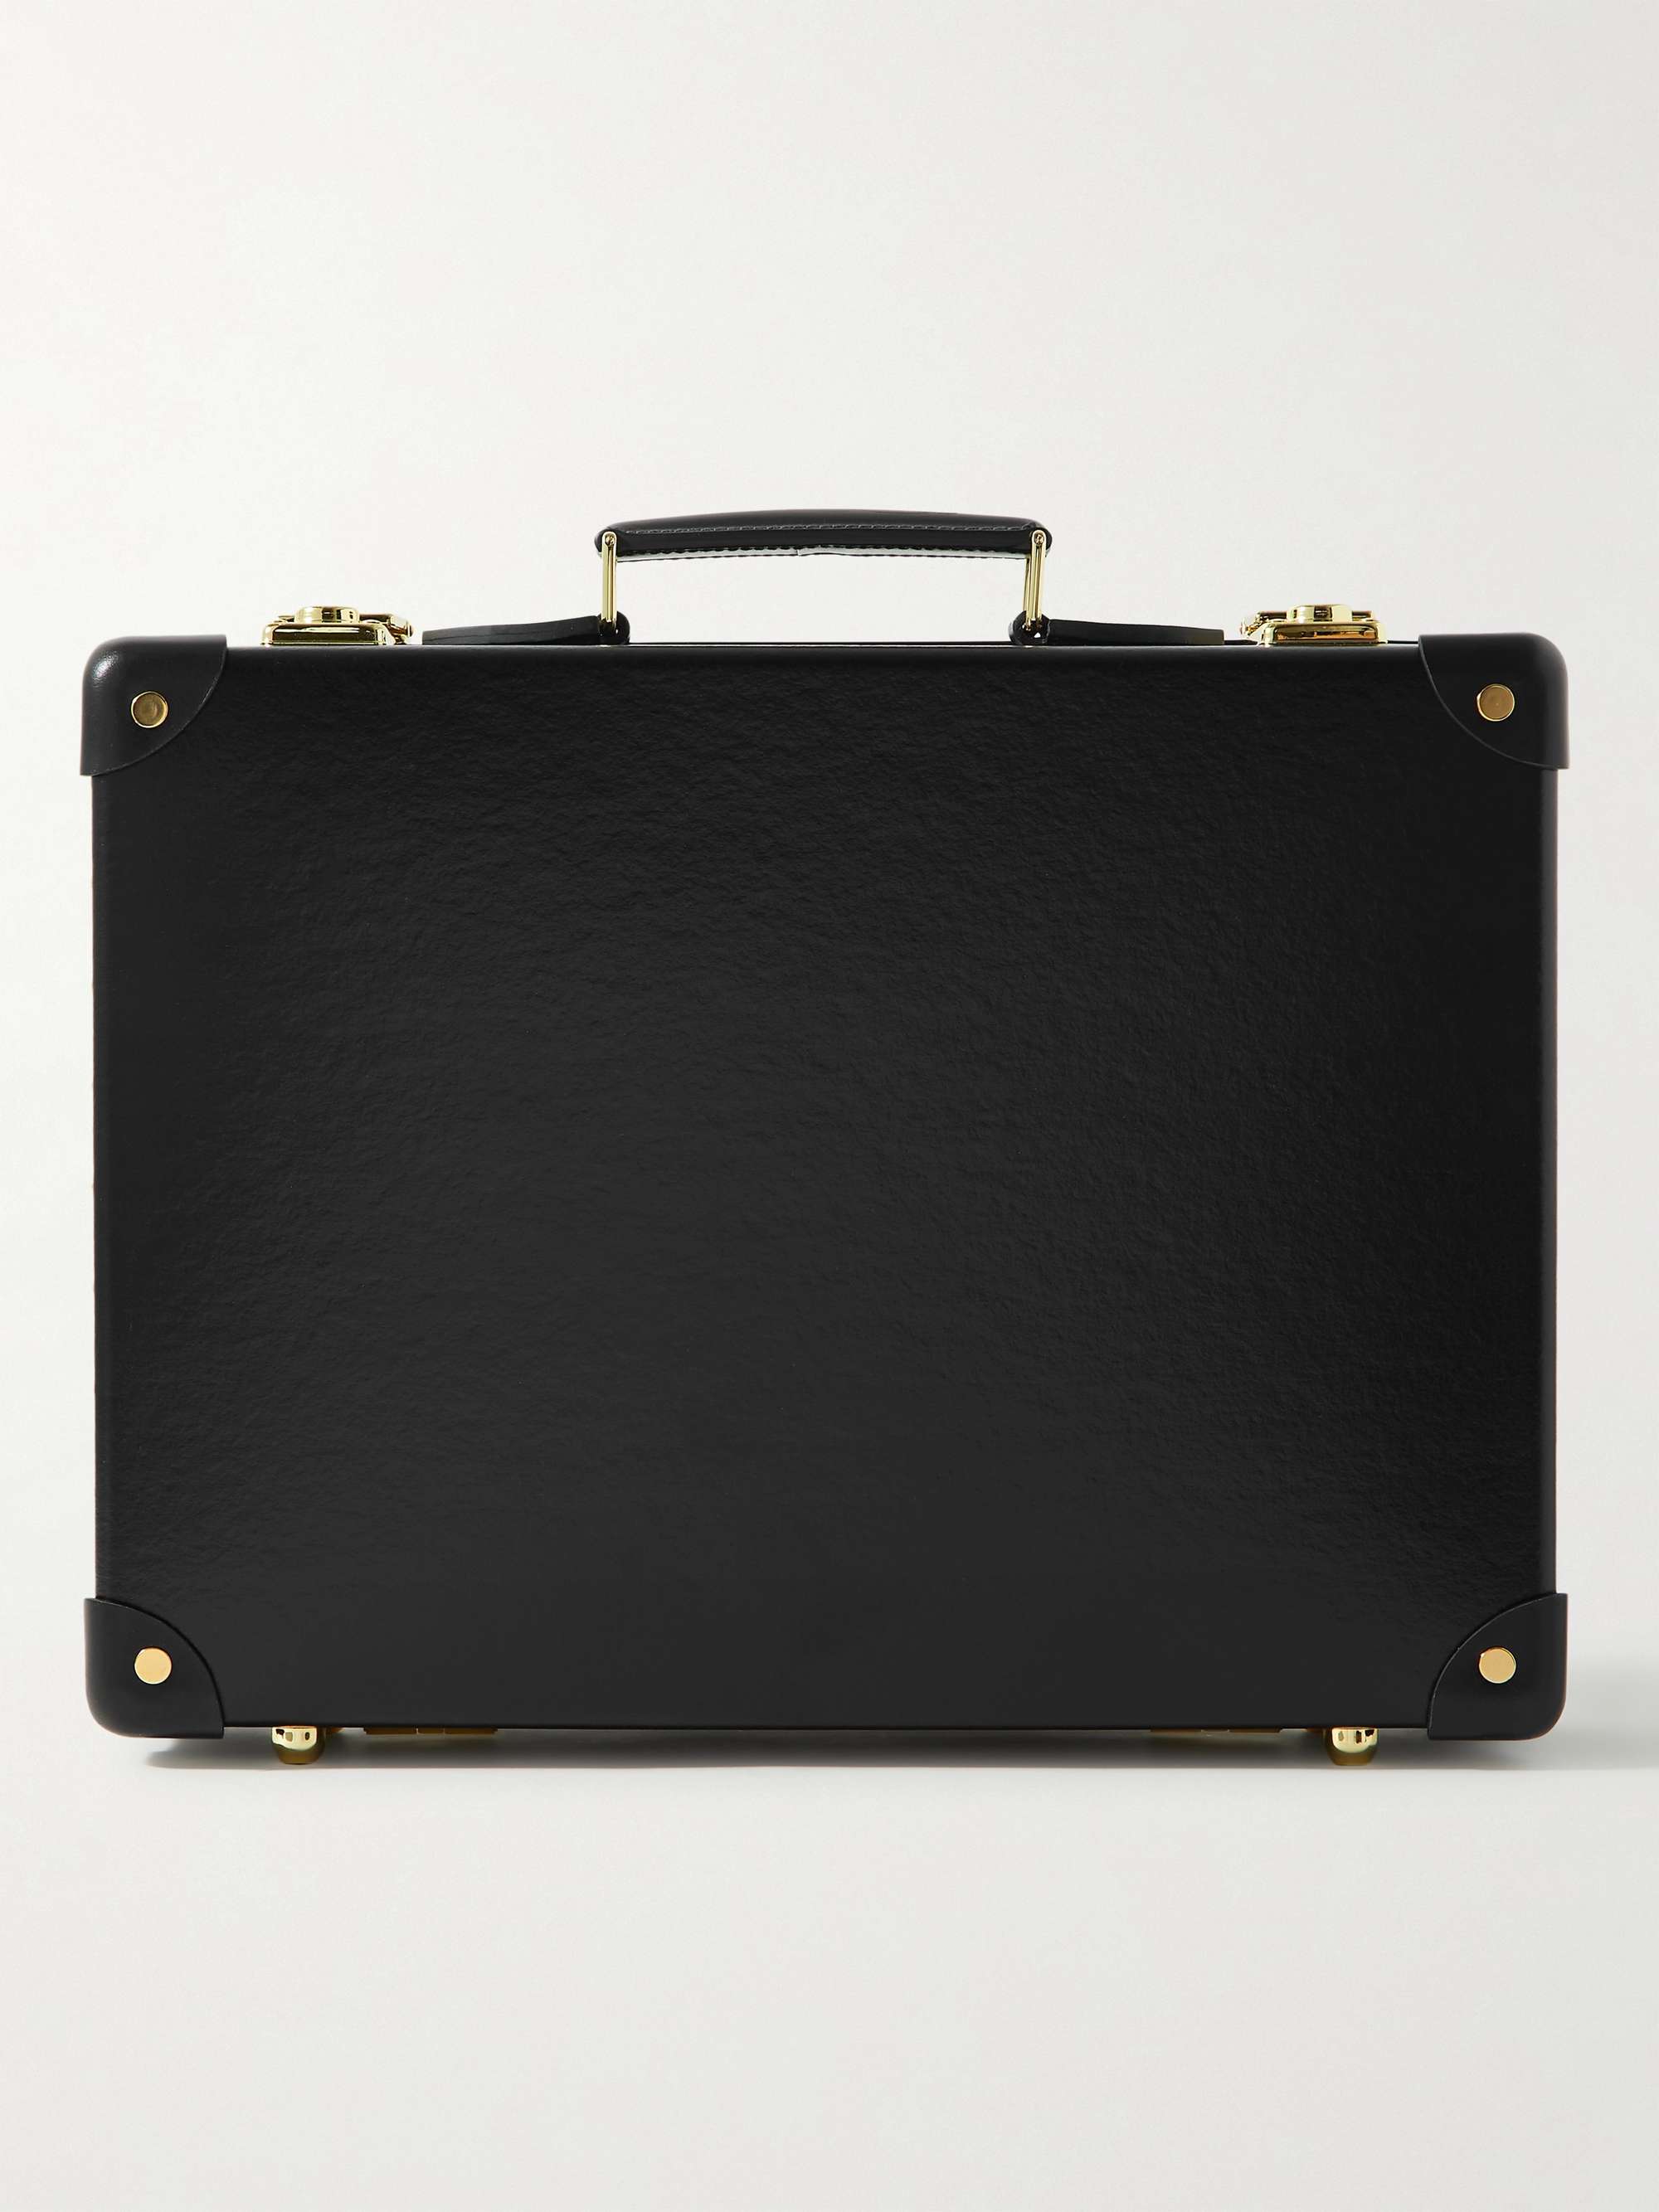 GLOBE-TROTTER Centenary Leather-Trimmed Briefcase